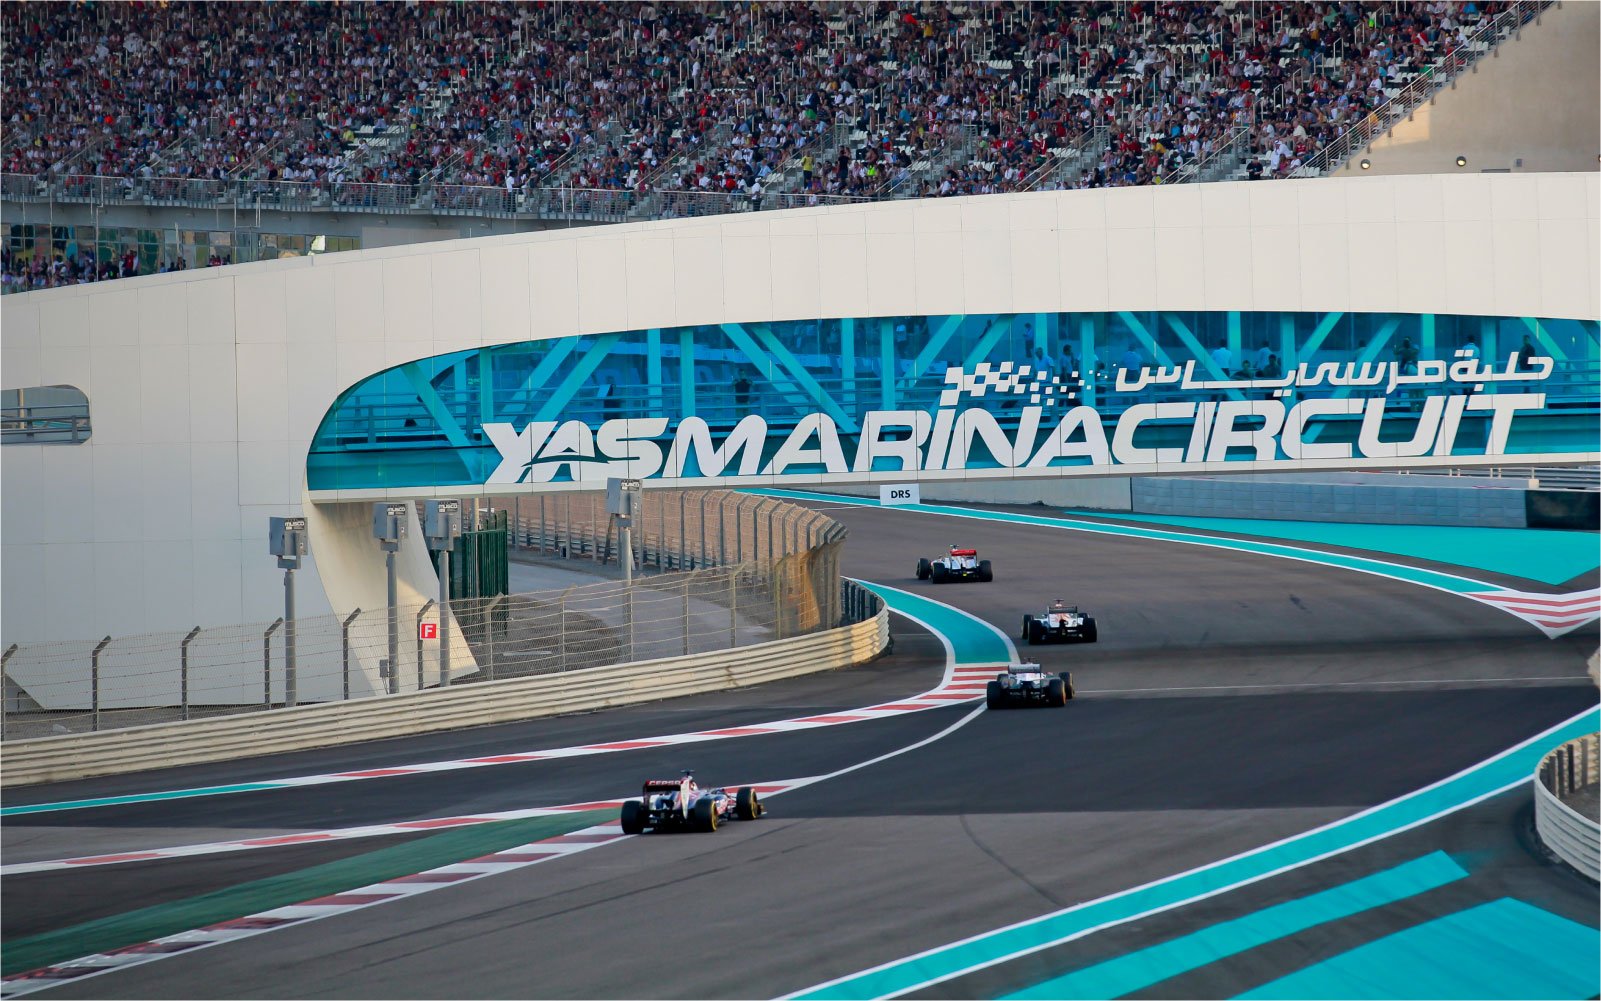 Four racecars on the track at Yas Marina Circuit